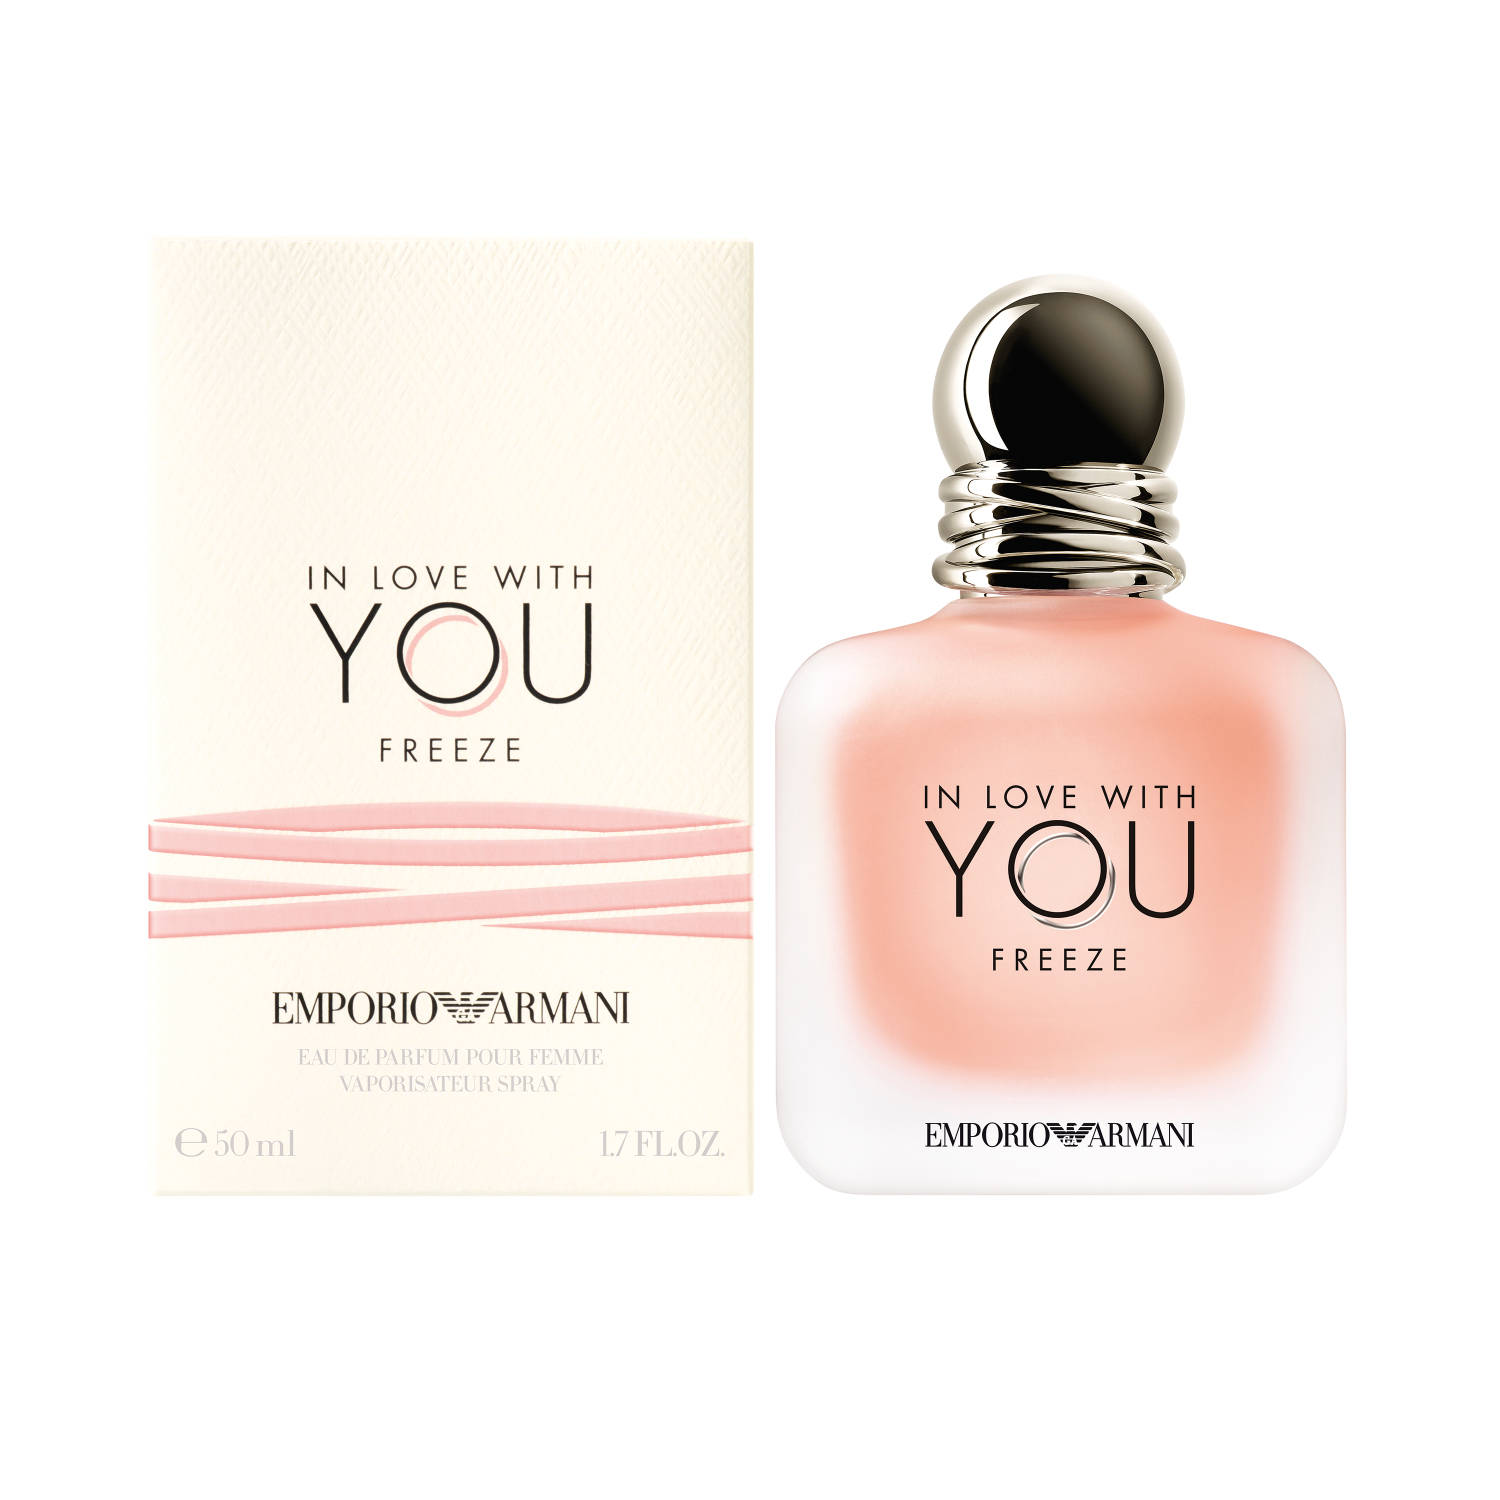 emporio armani in love with you